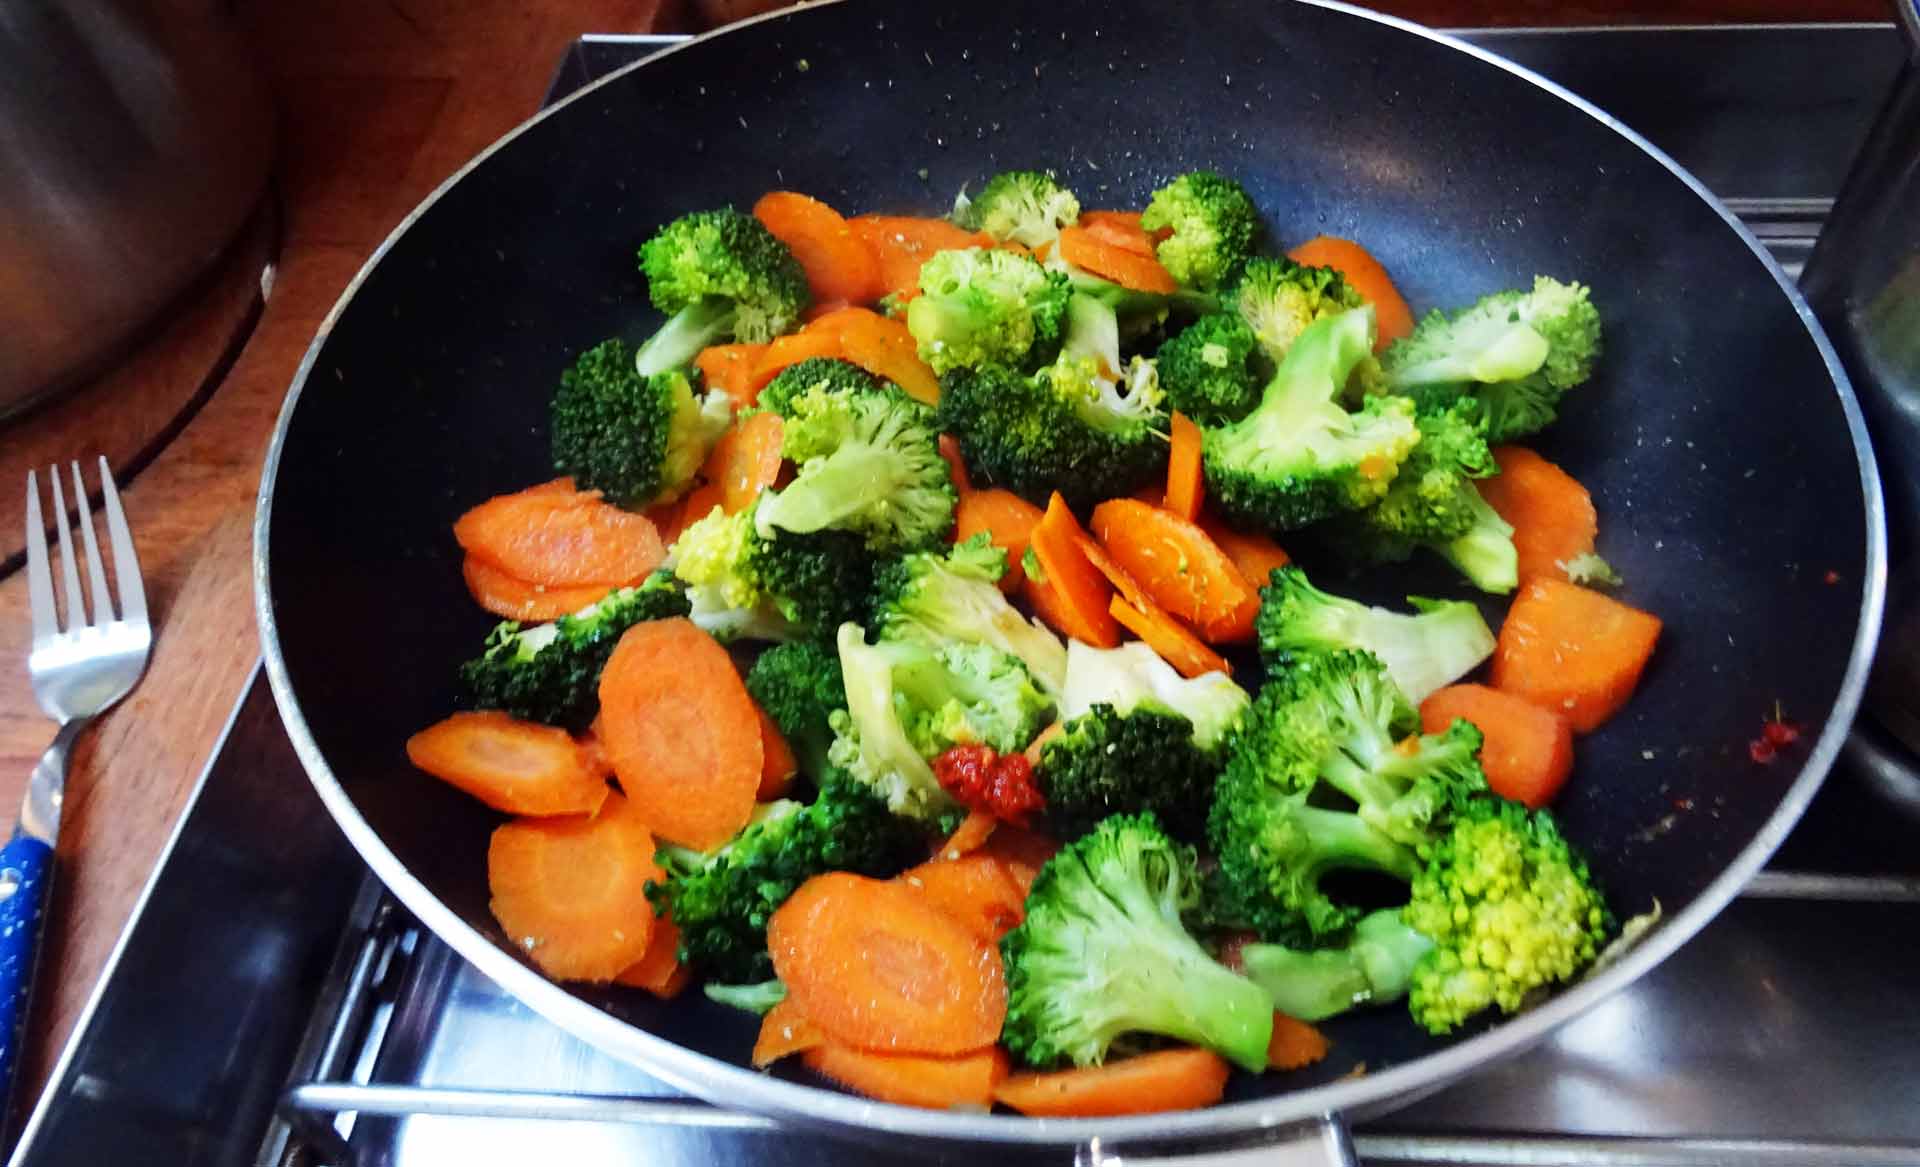 Carrots and Broccoli should be pre-boiled in hot water